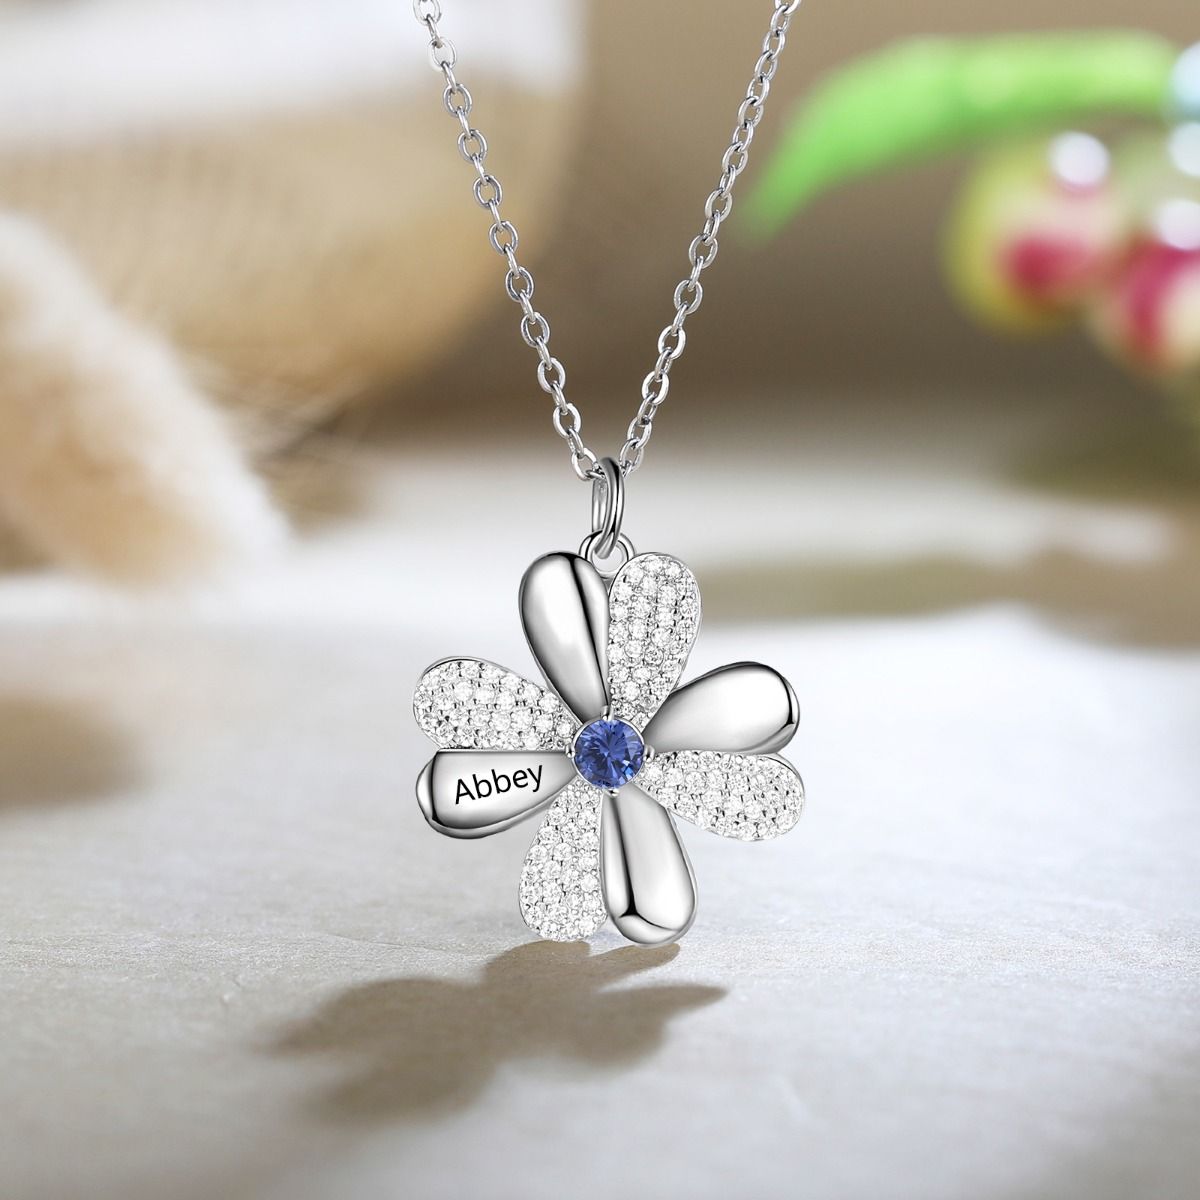 Personalised Clover Necklace With Up tp 4 Birthstones And Names Engraved | Bespoke Necklace For Her